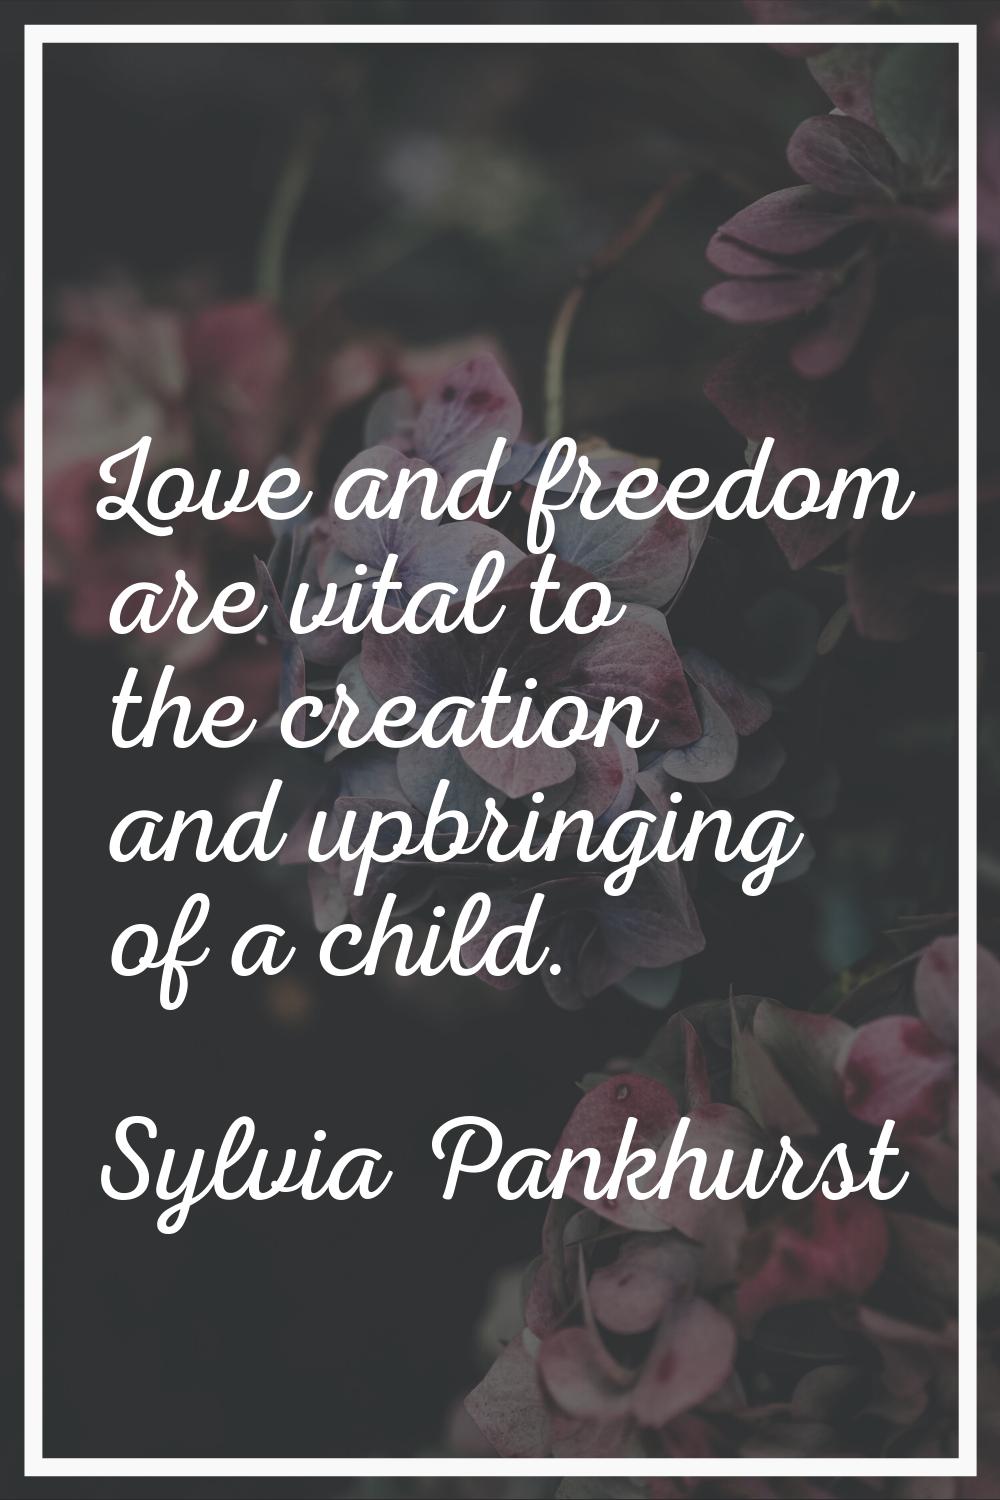 Love and freedom are vital to the creation and upbringing of a child.